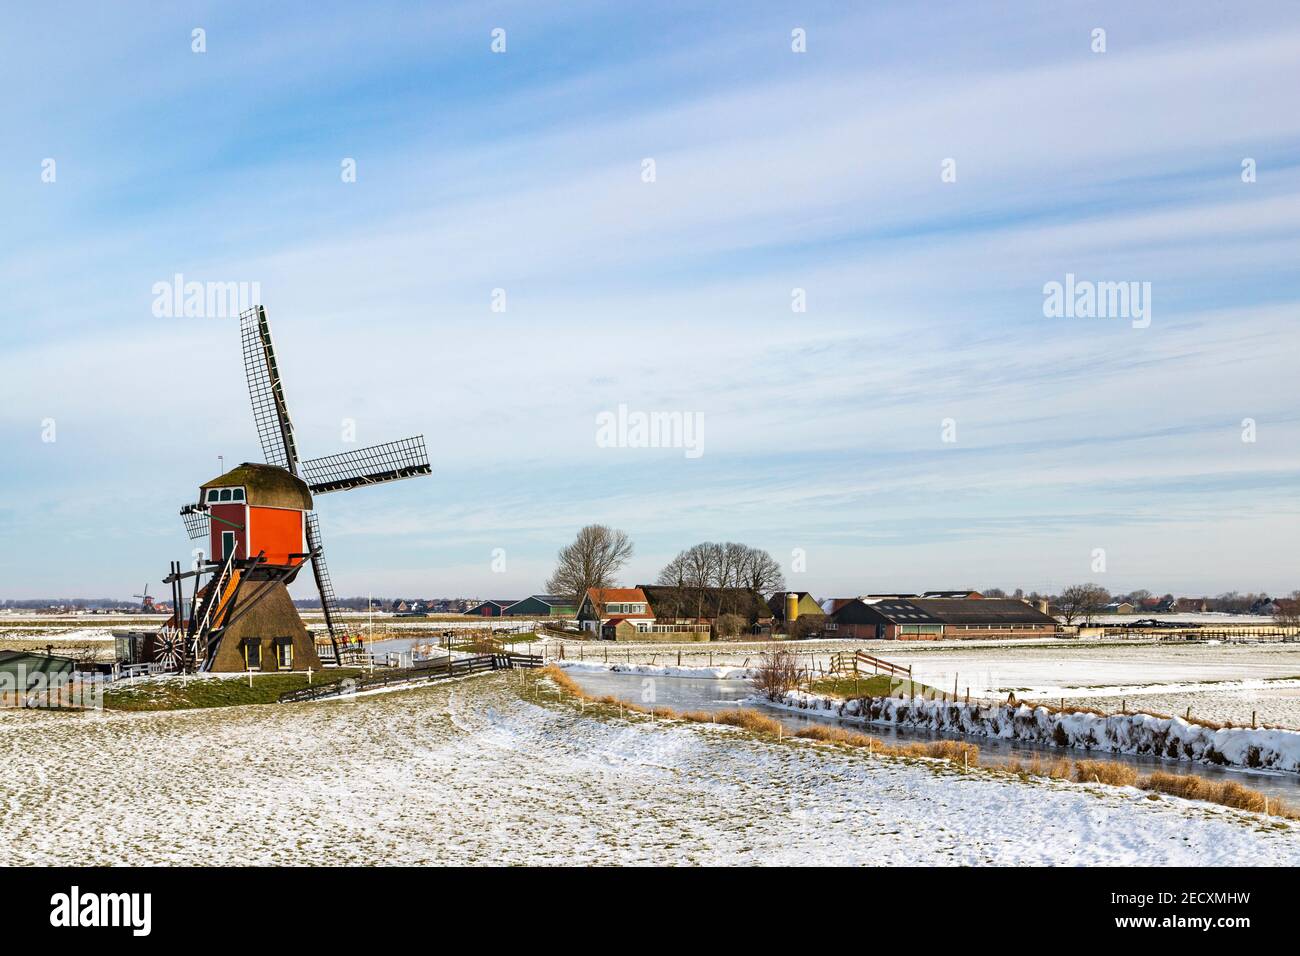 Iconic Dutch winter scene, ice skating in a polder landscape with the Rode Molen, a historic post mill at Oud Ade, South Holland, The Netherlands. Stock Photo